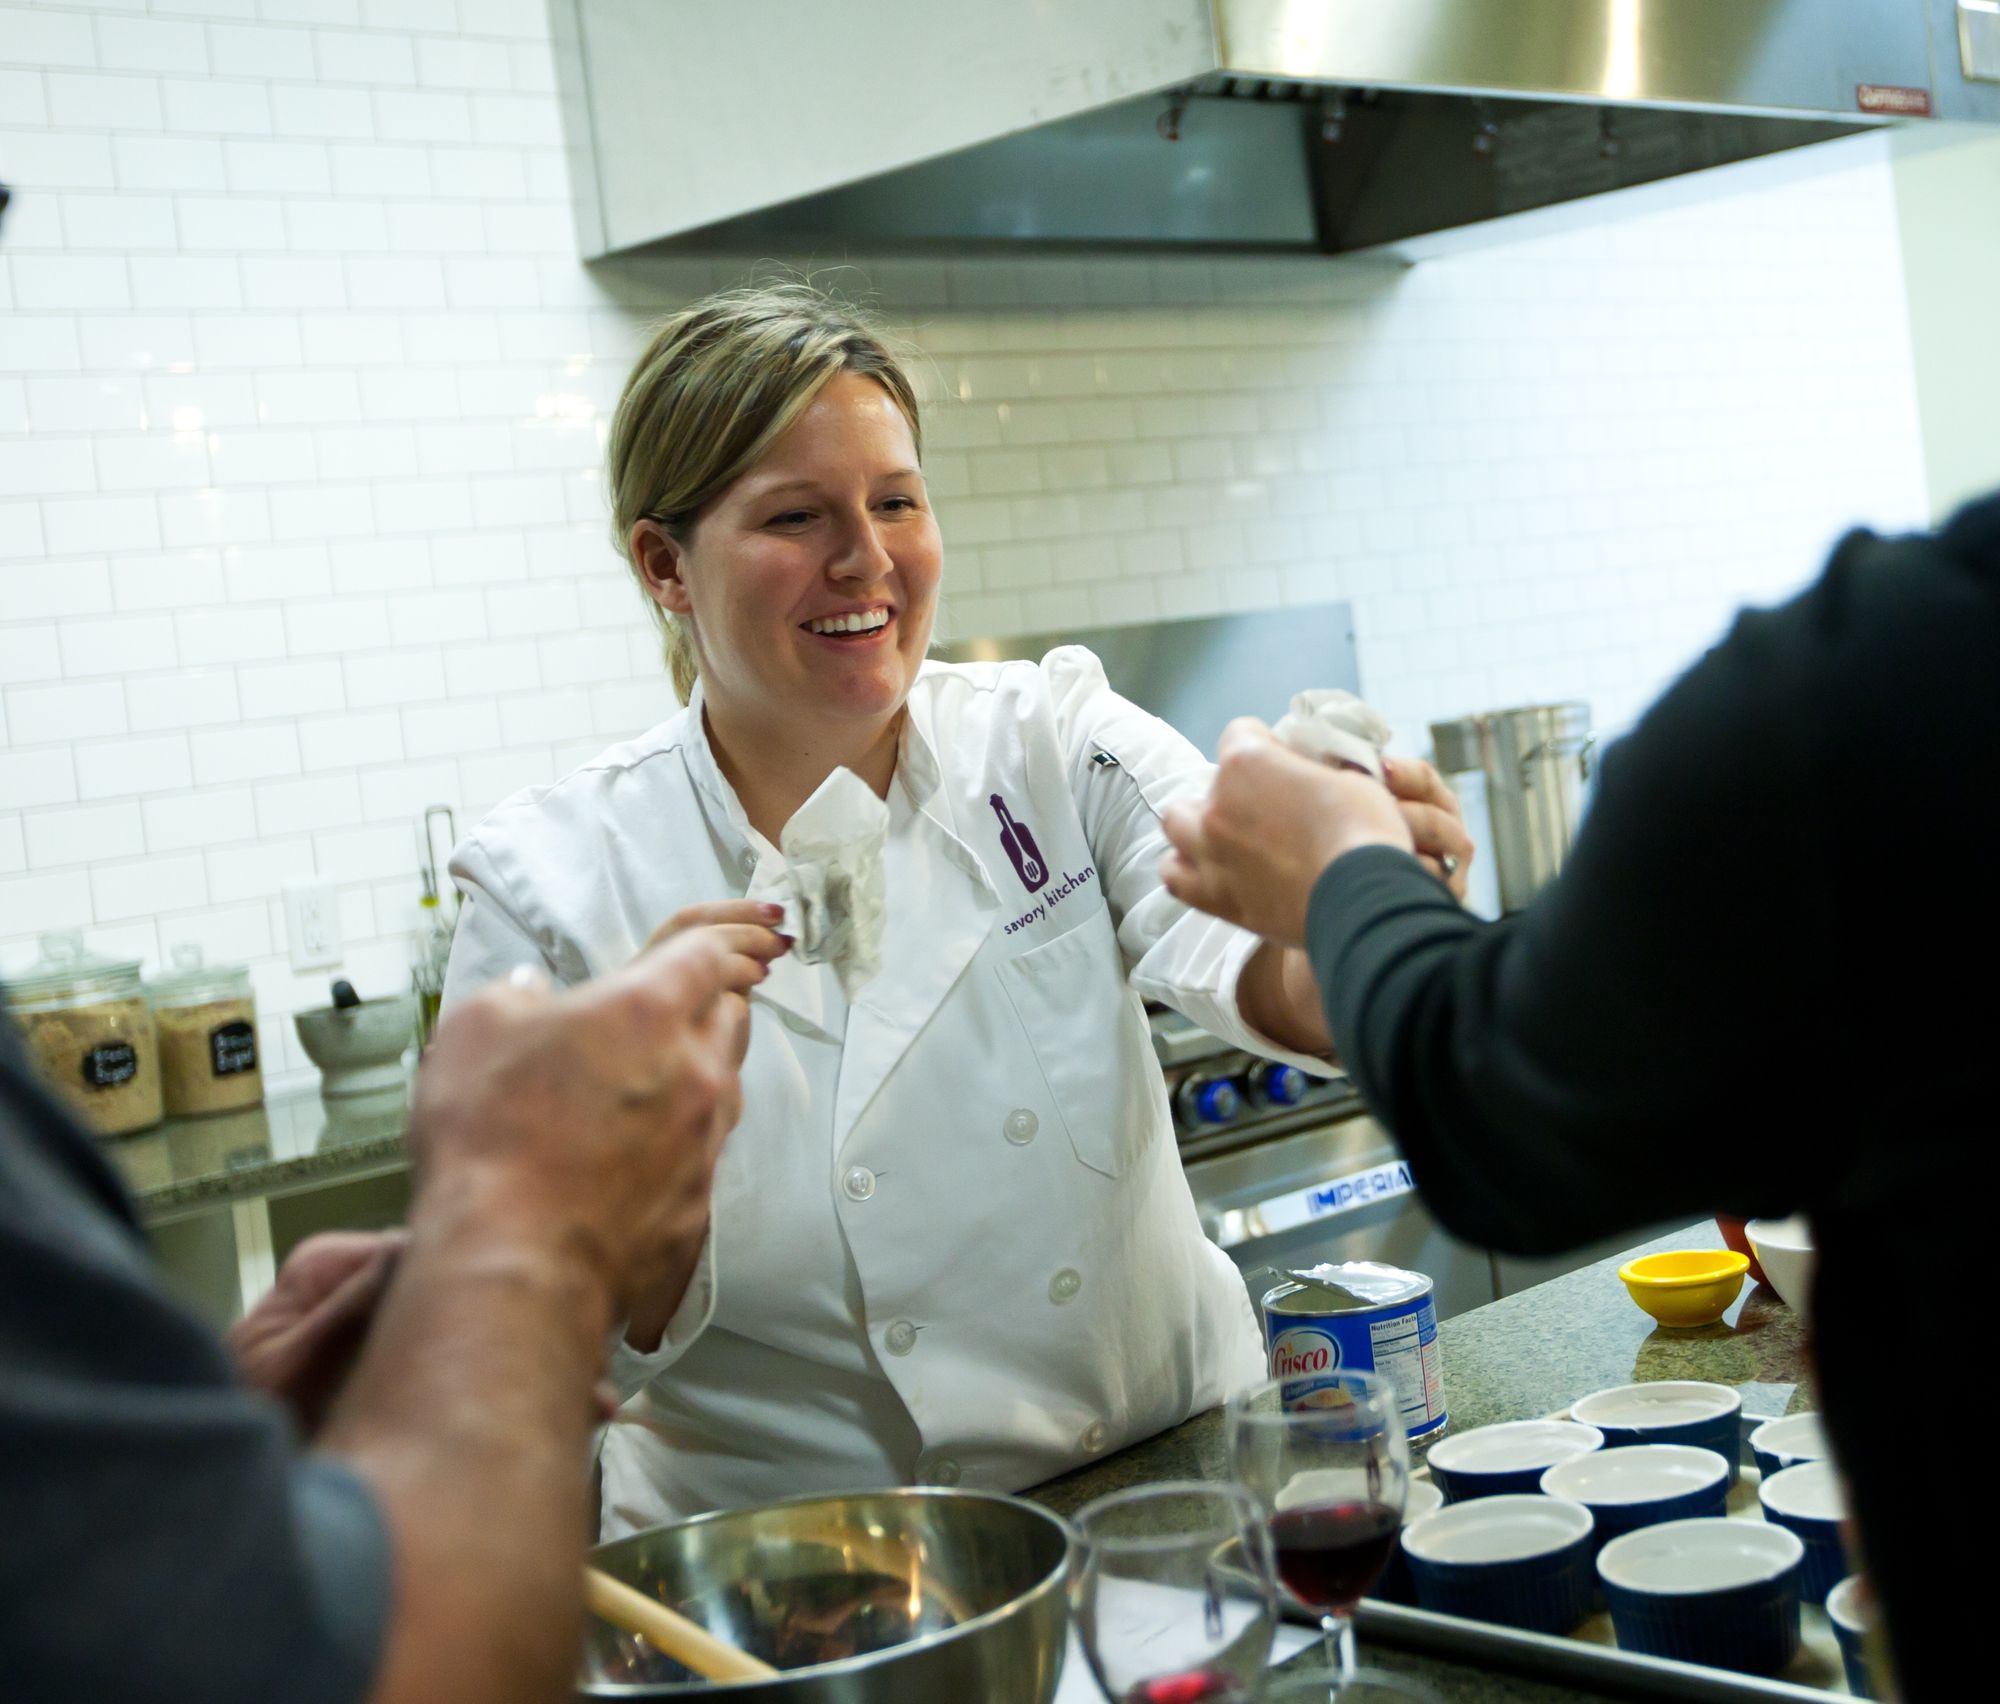 Teambuilding through cooking - Cultivate Kitchen